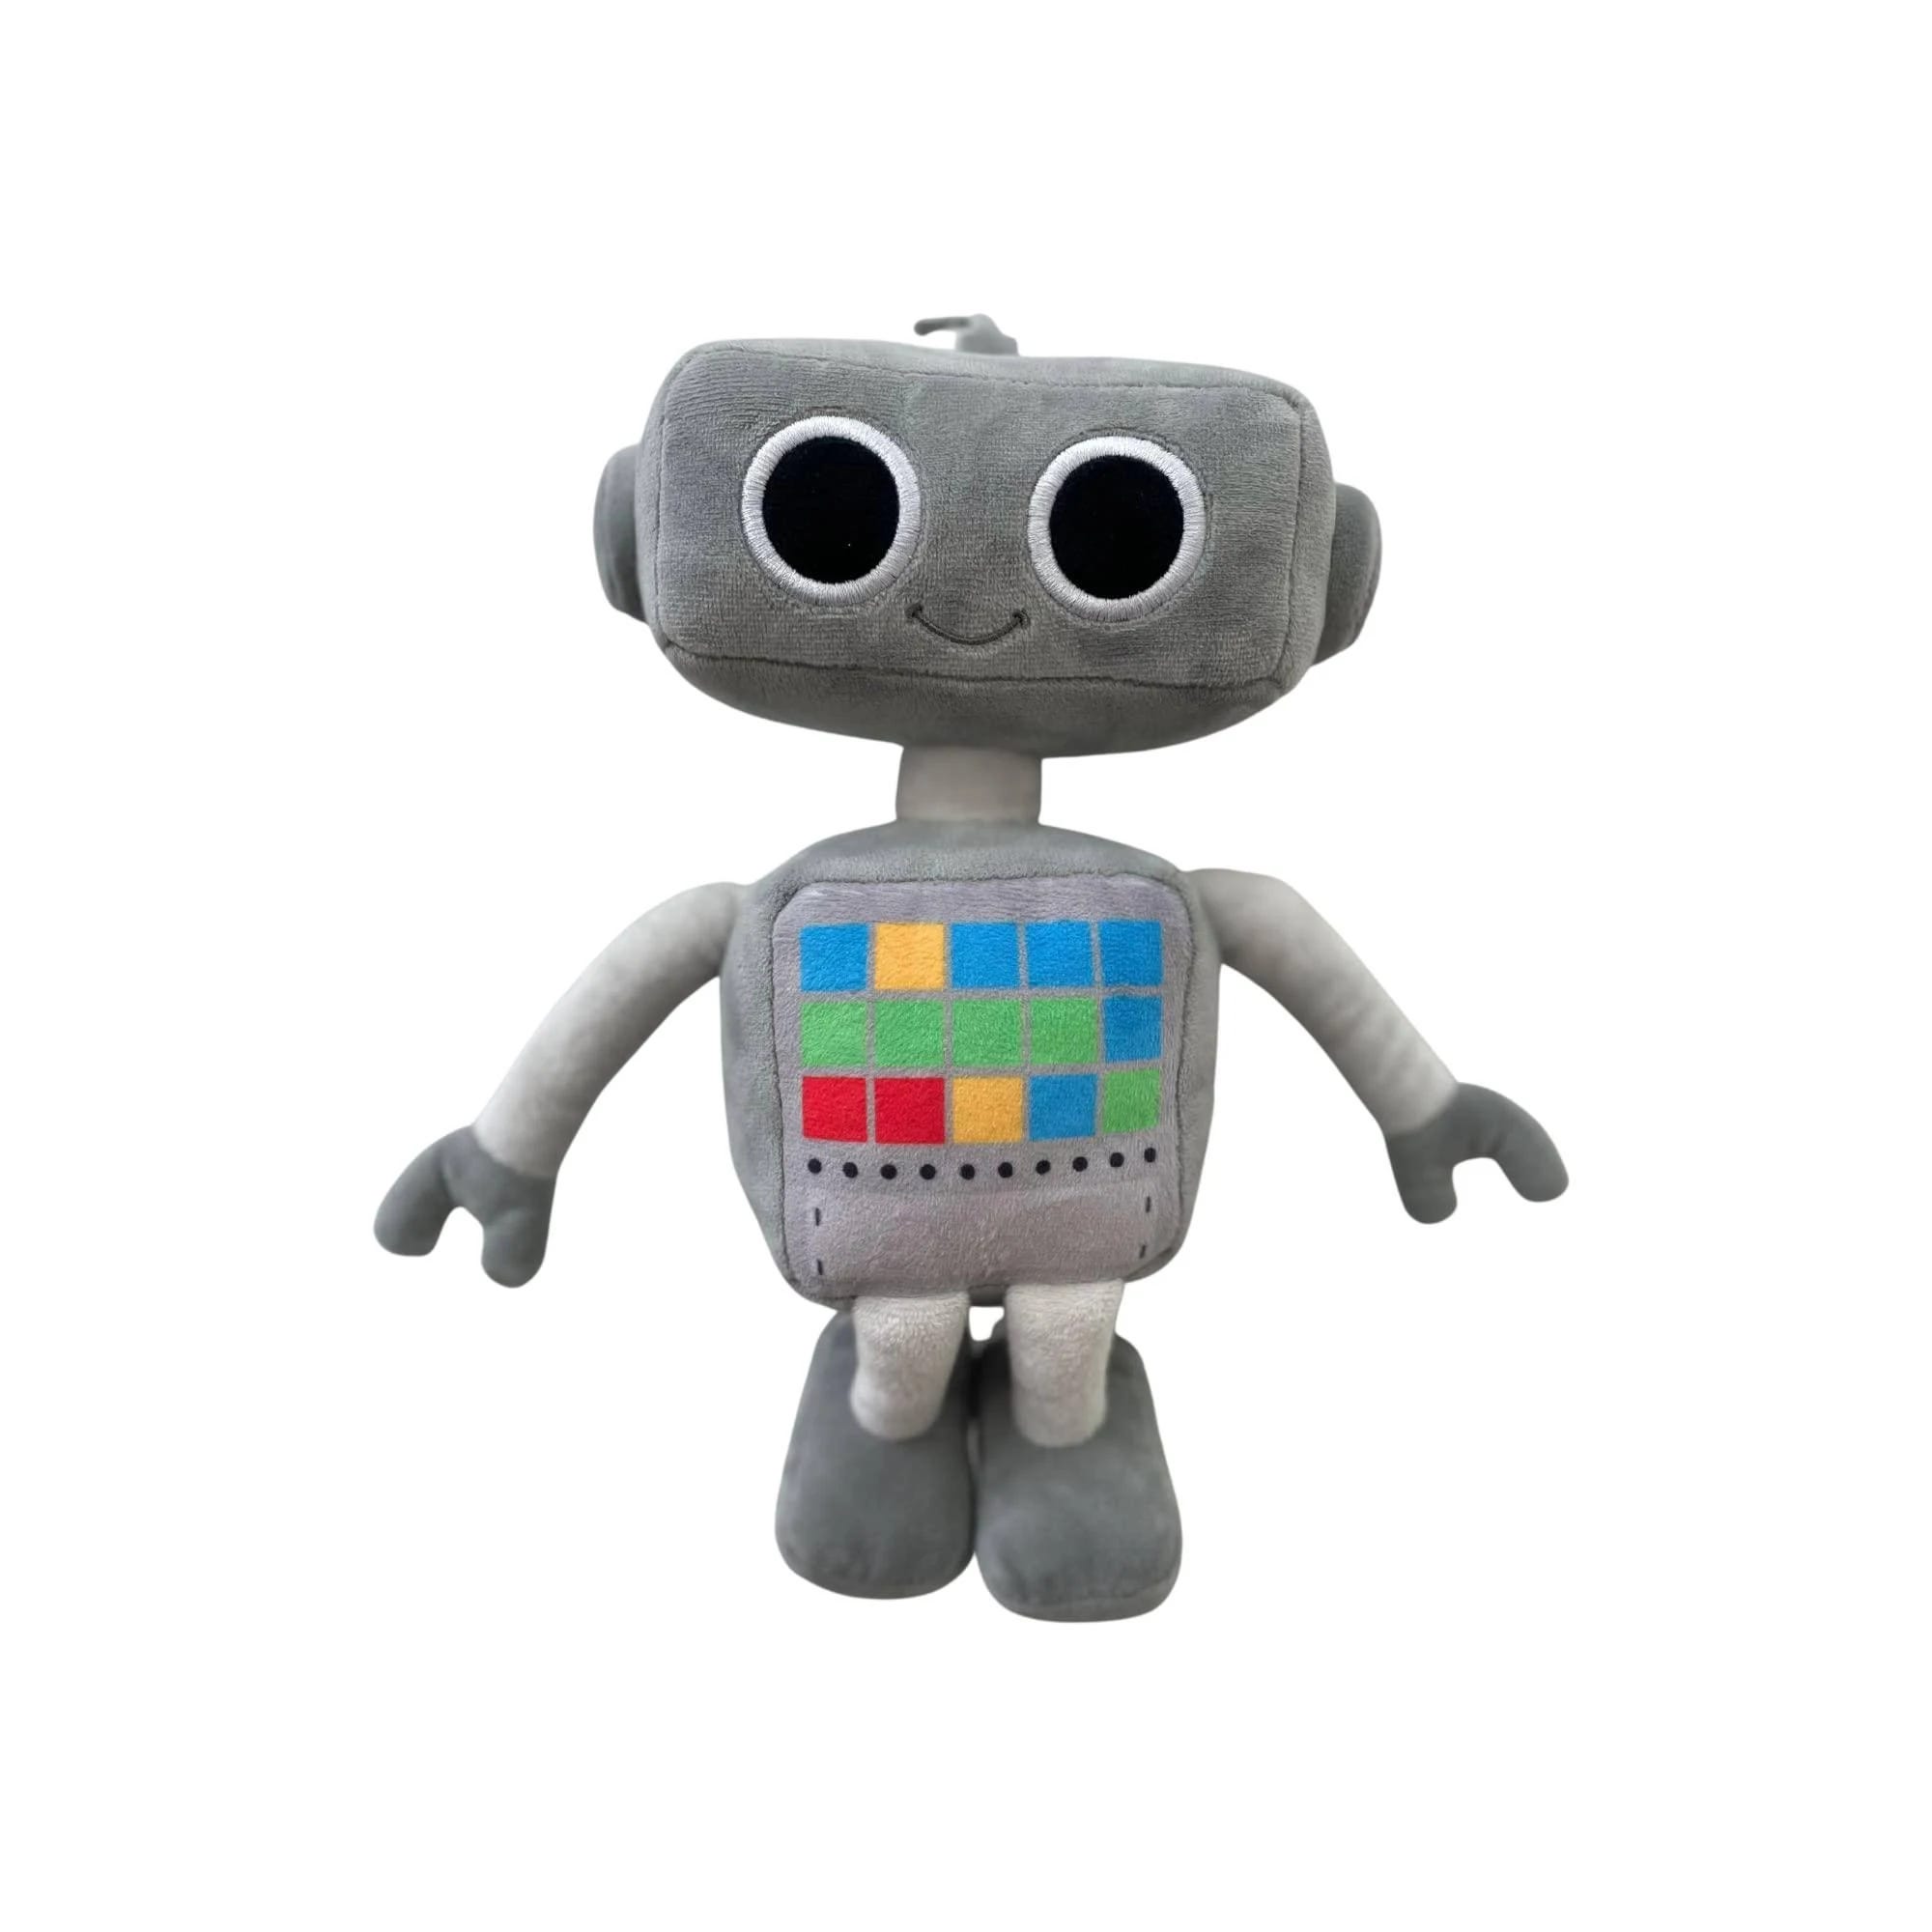 Plush Jett the Robot: Indoor Fun from Listener Kids' YouTube Channel - 9-inch Height | Image